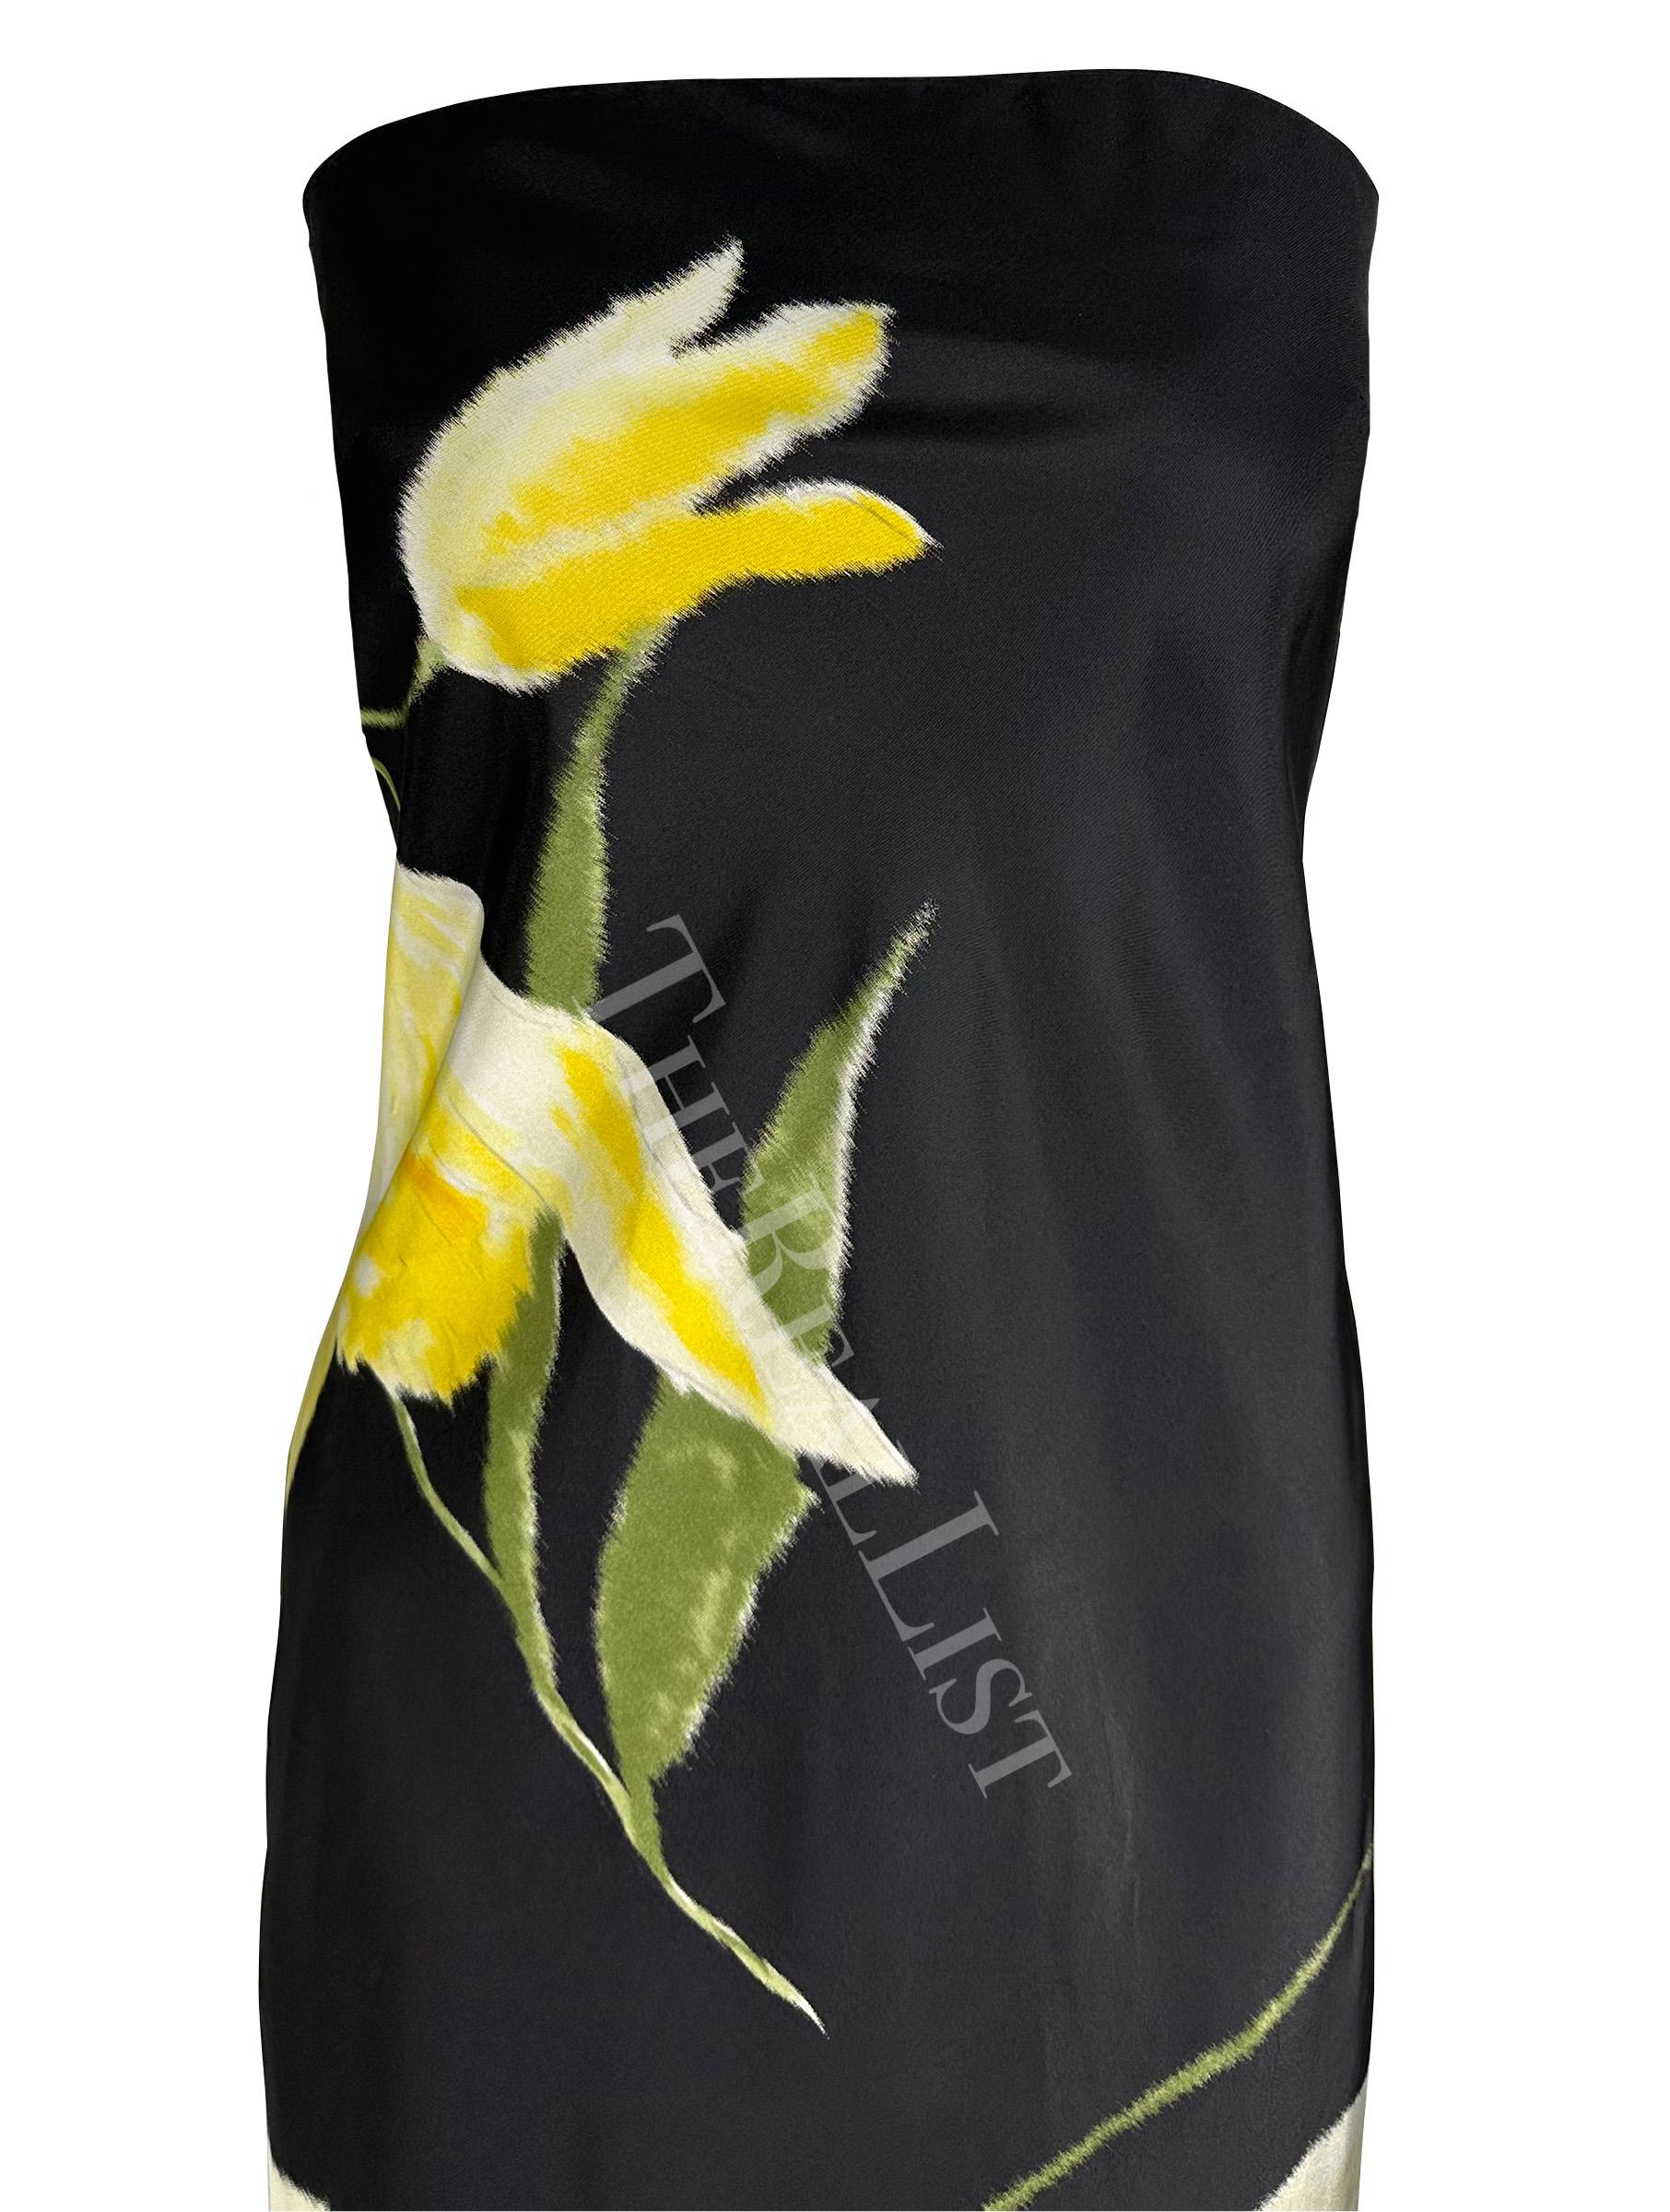 S/S 2000 Ralph Lauren Runway Black Yellow Floral Strapless Cocktail Dress In Excellent Condition For Sale In West Hollywood, CA